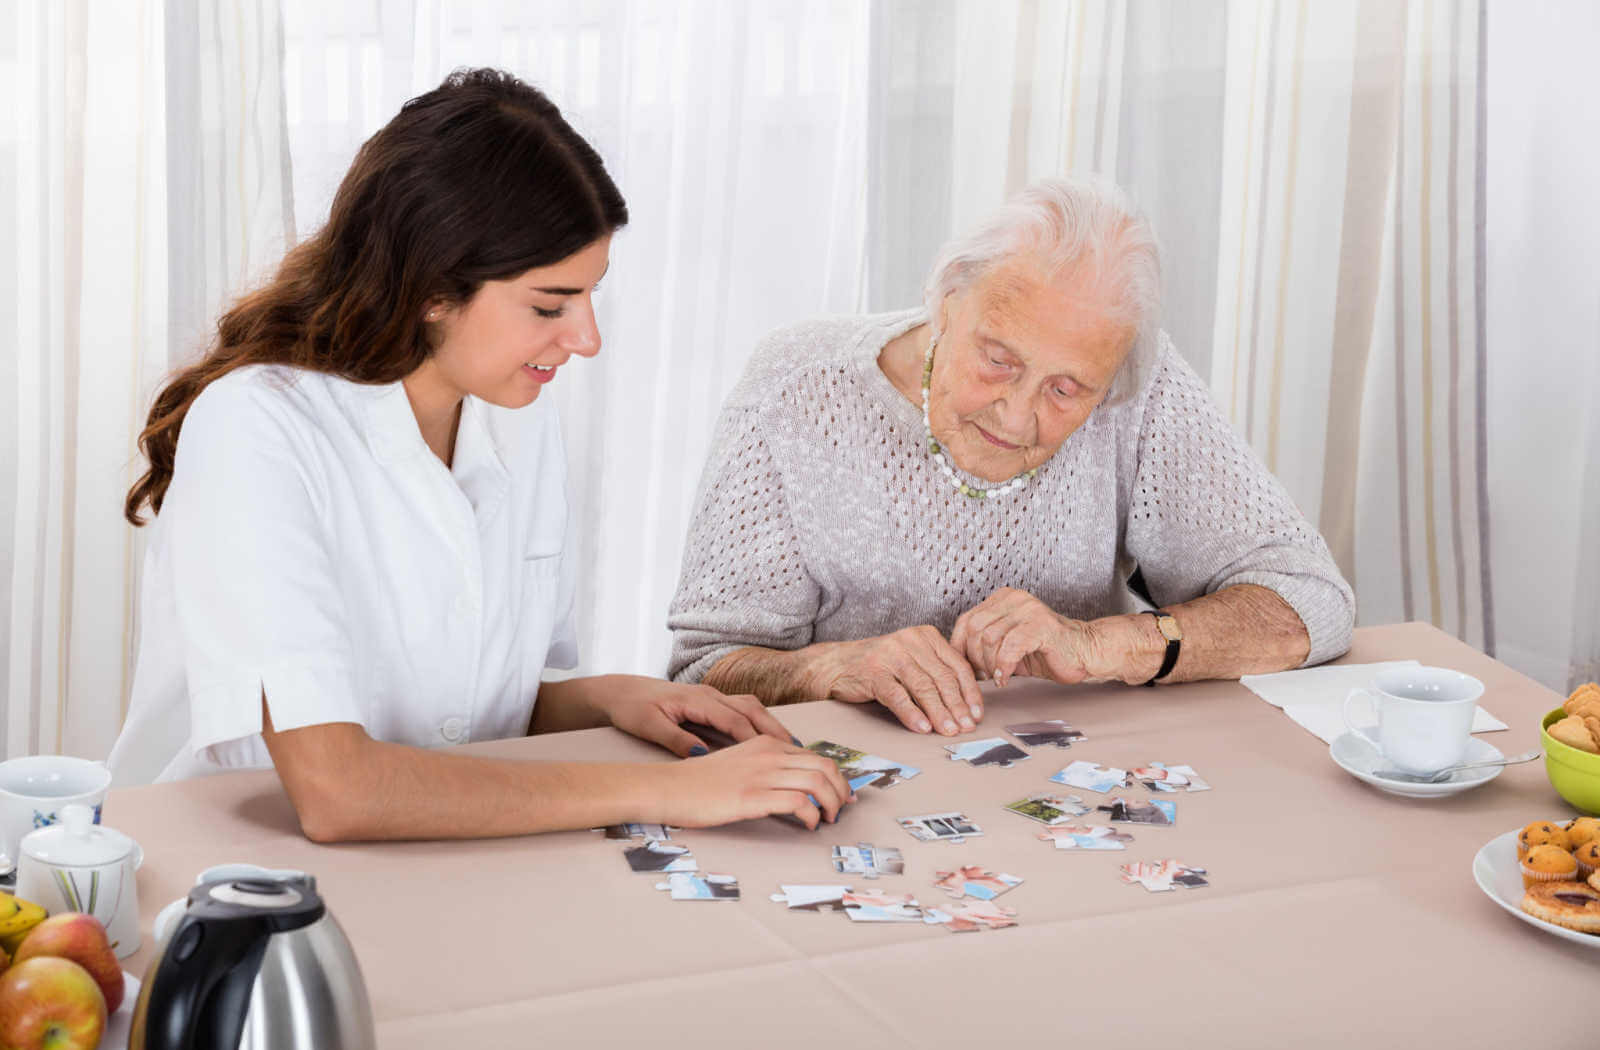 A young female nursing assistant in her white uniform is sitting beside an old lady while they are playing puzzles on the table.